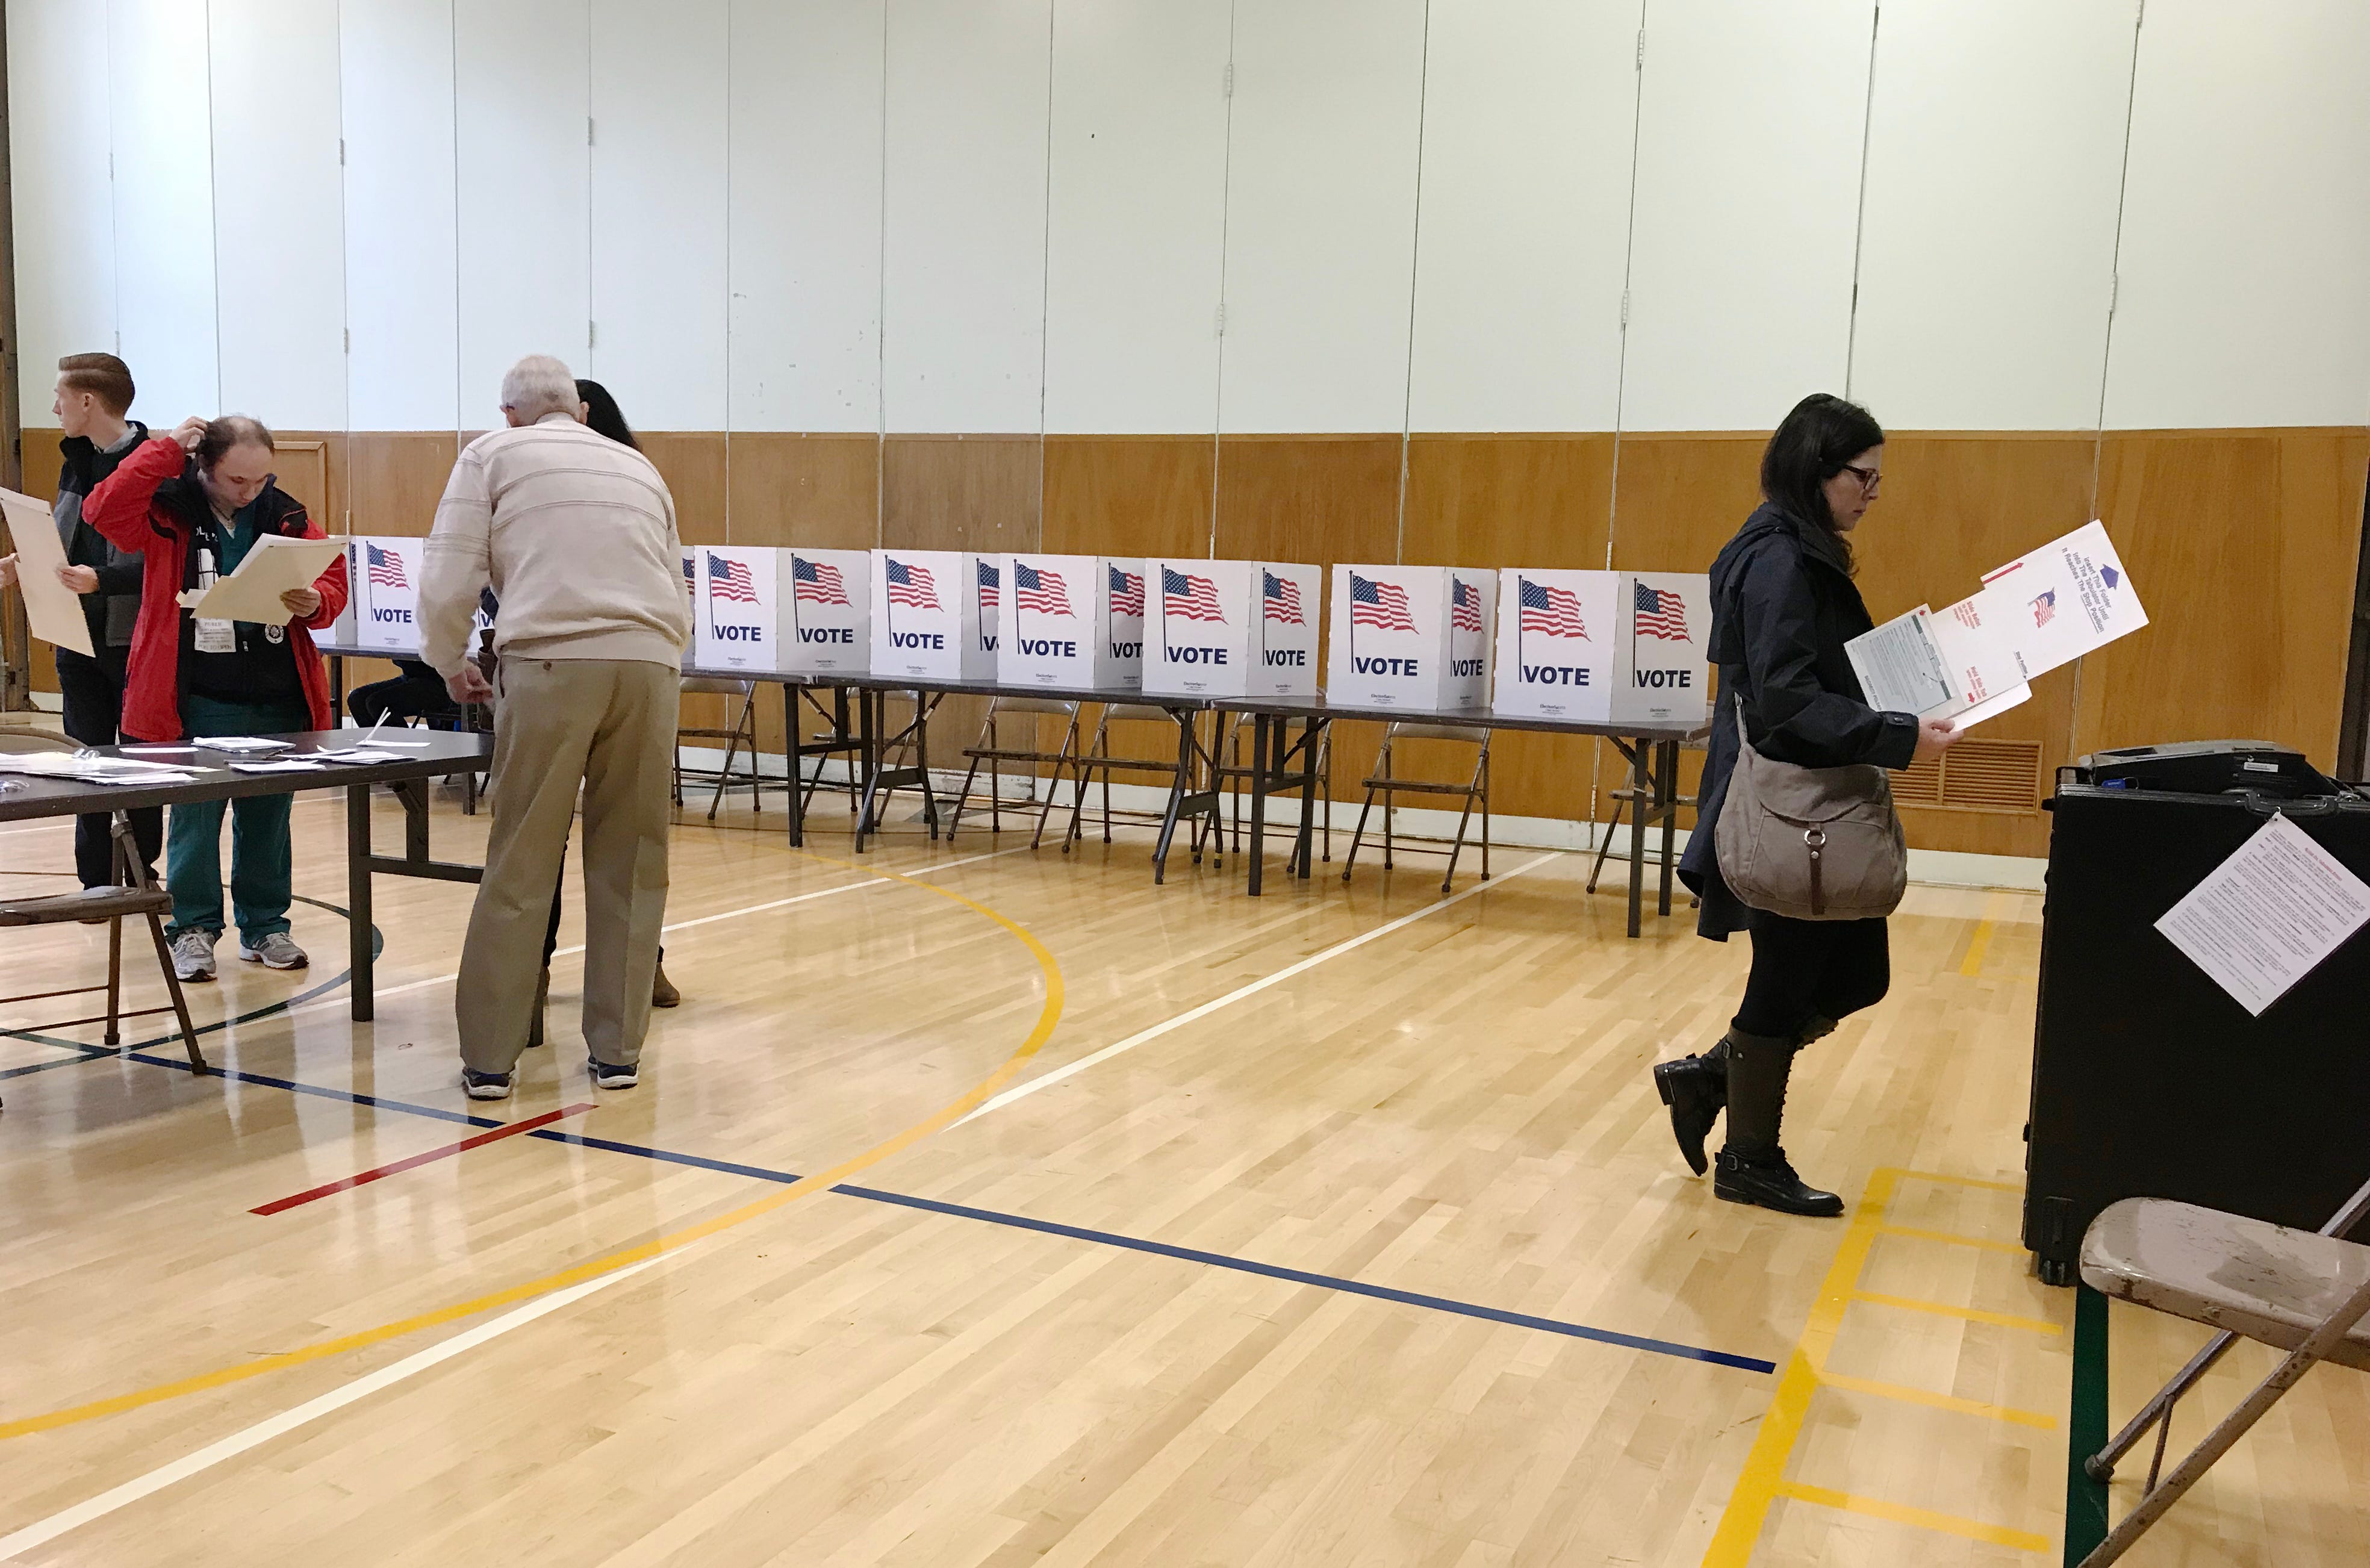 Voters cast their ballots in the gymnasium at Monteith Elementary School on midterm election day, Tuesday, Nov. 6, 2018 in Grosse Pointe Woods, Michigan.